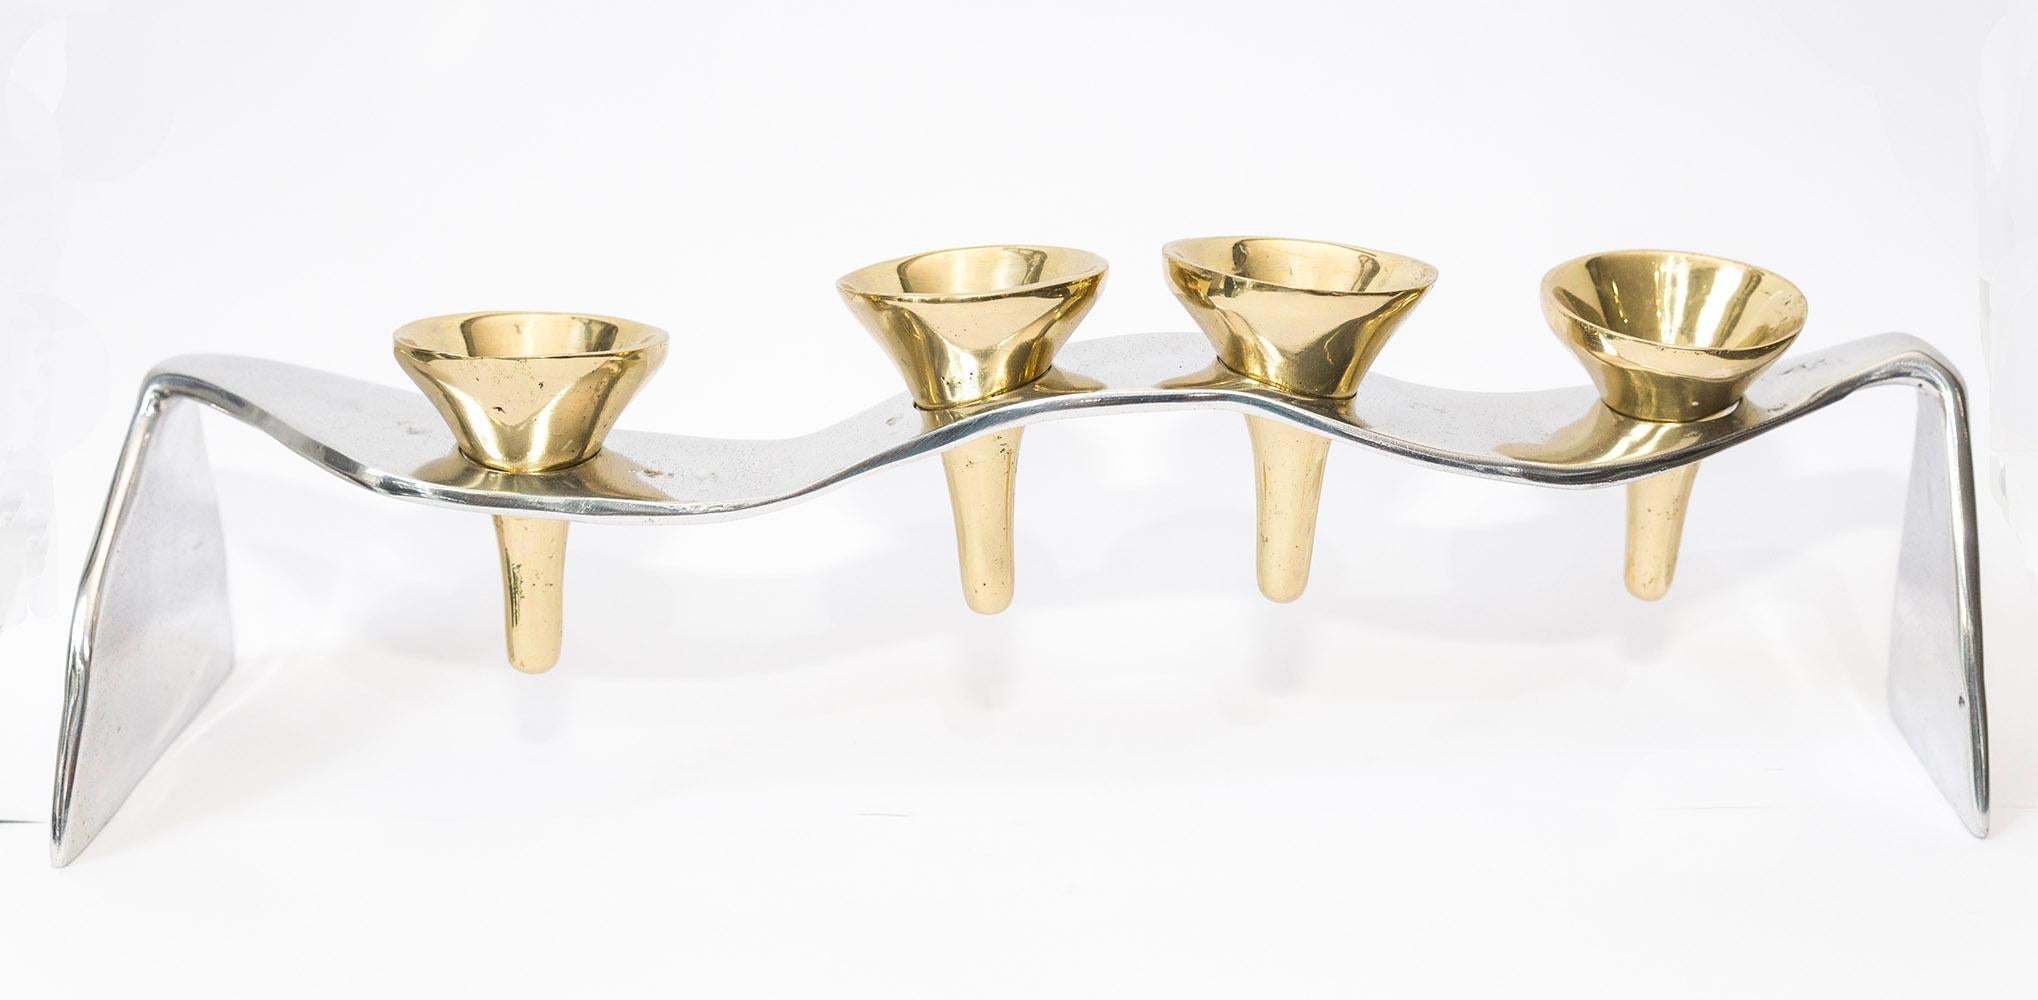 Contemporary Candelabra Sinuoso 4 Velas made of solid Brass and Aluminium Handmade For Sale